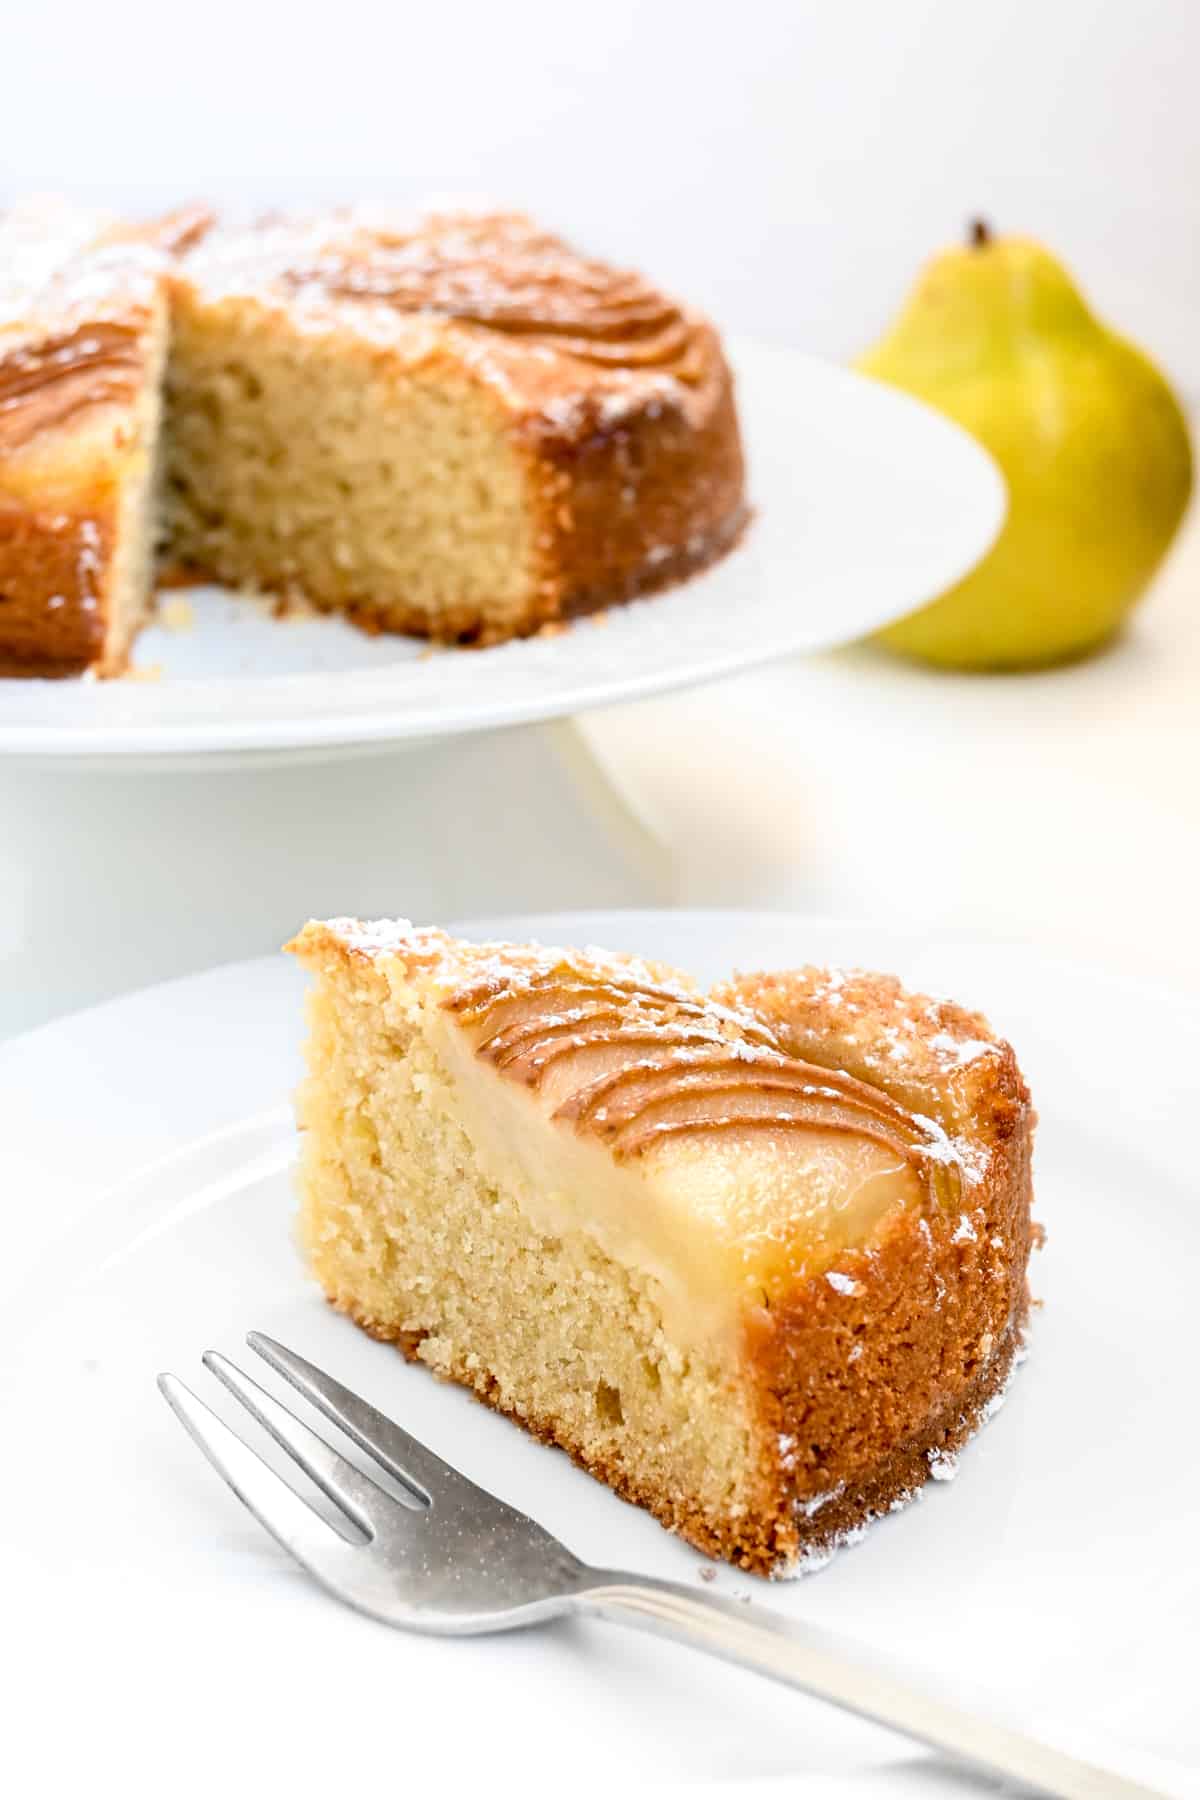 A slice of pear cake on a plate in front of the cake on the cake stand.